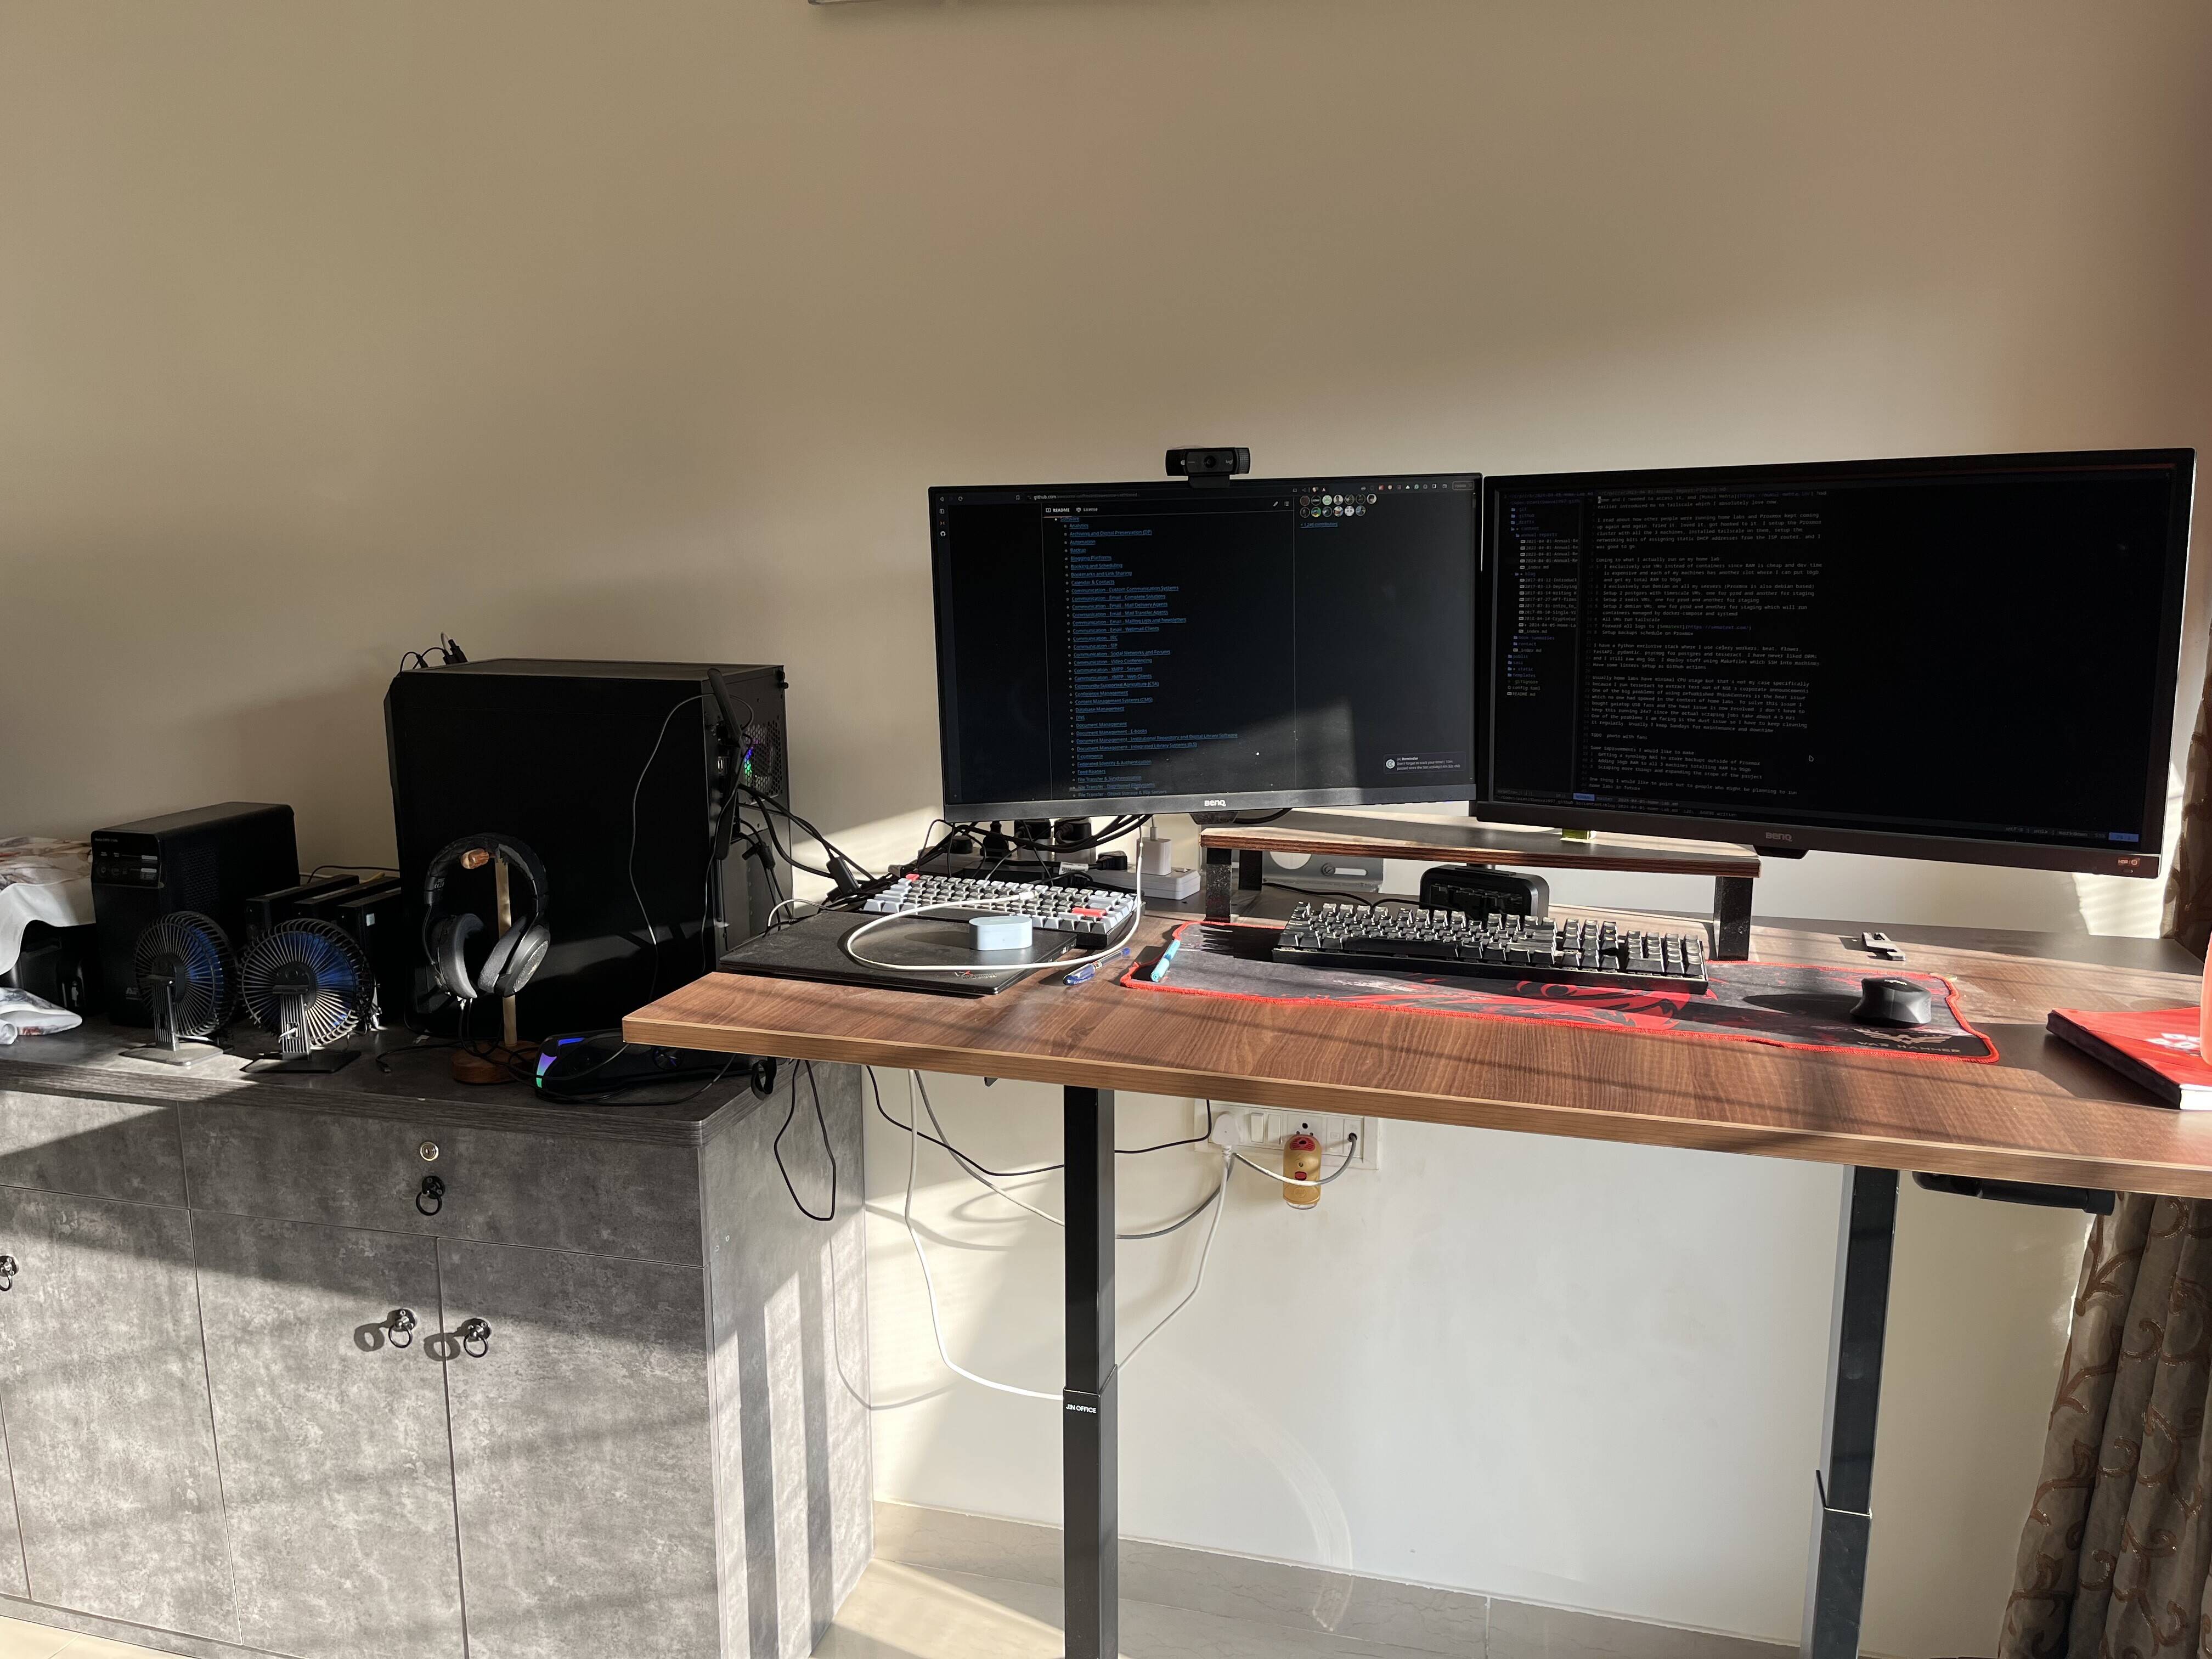 My workstation with PC build and homelab